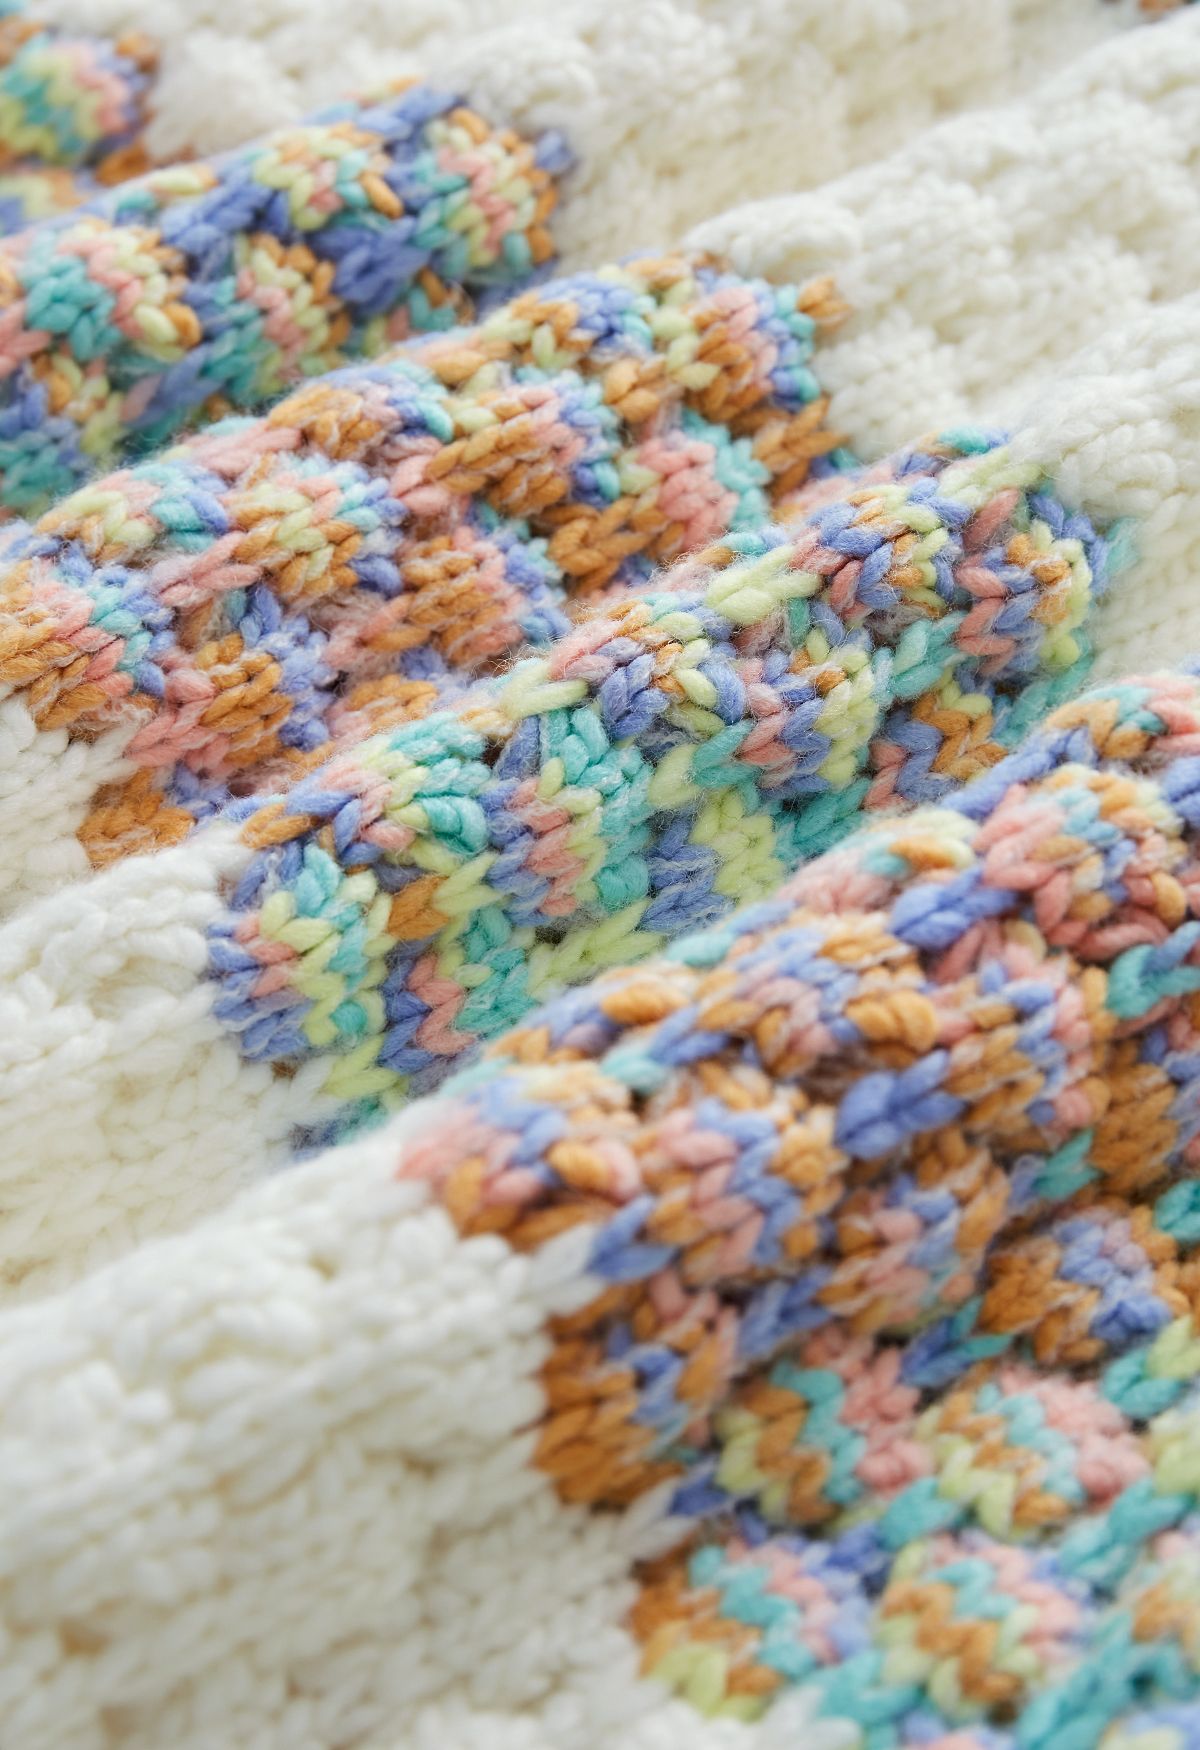 Colorful Stripe Embossed Chunky Knit Cardigan